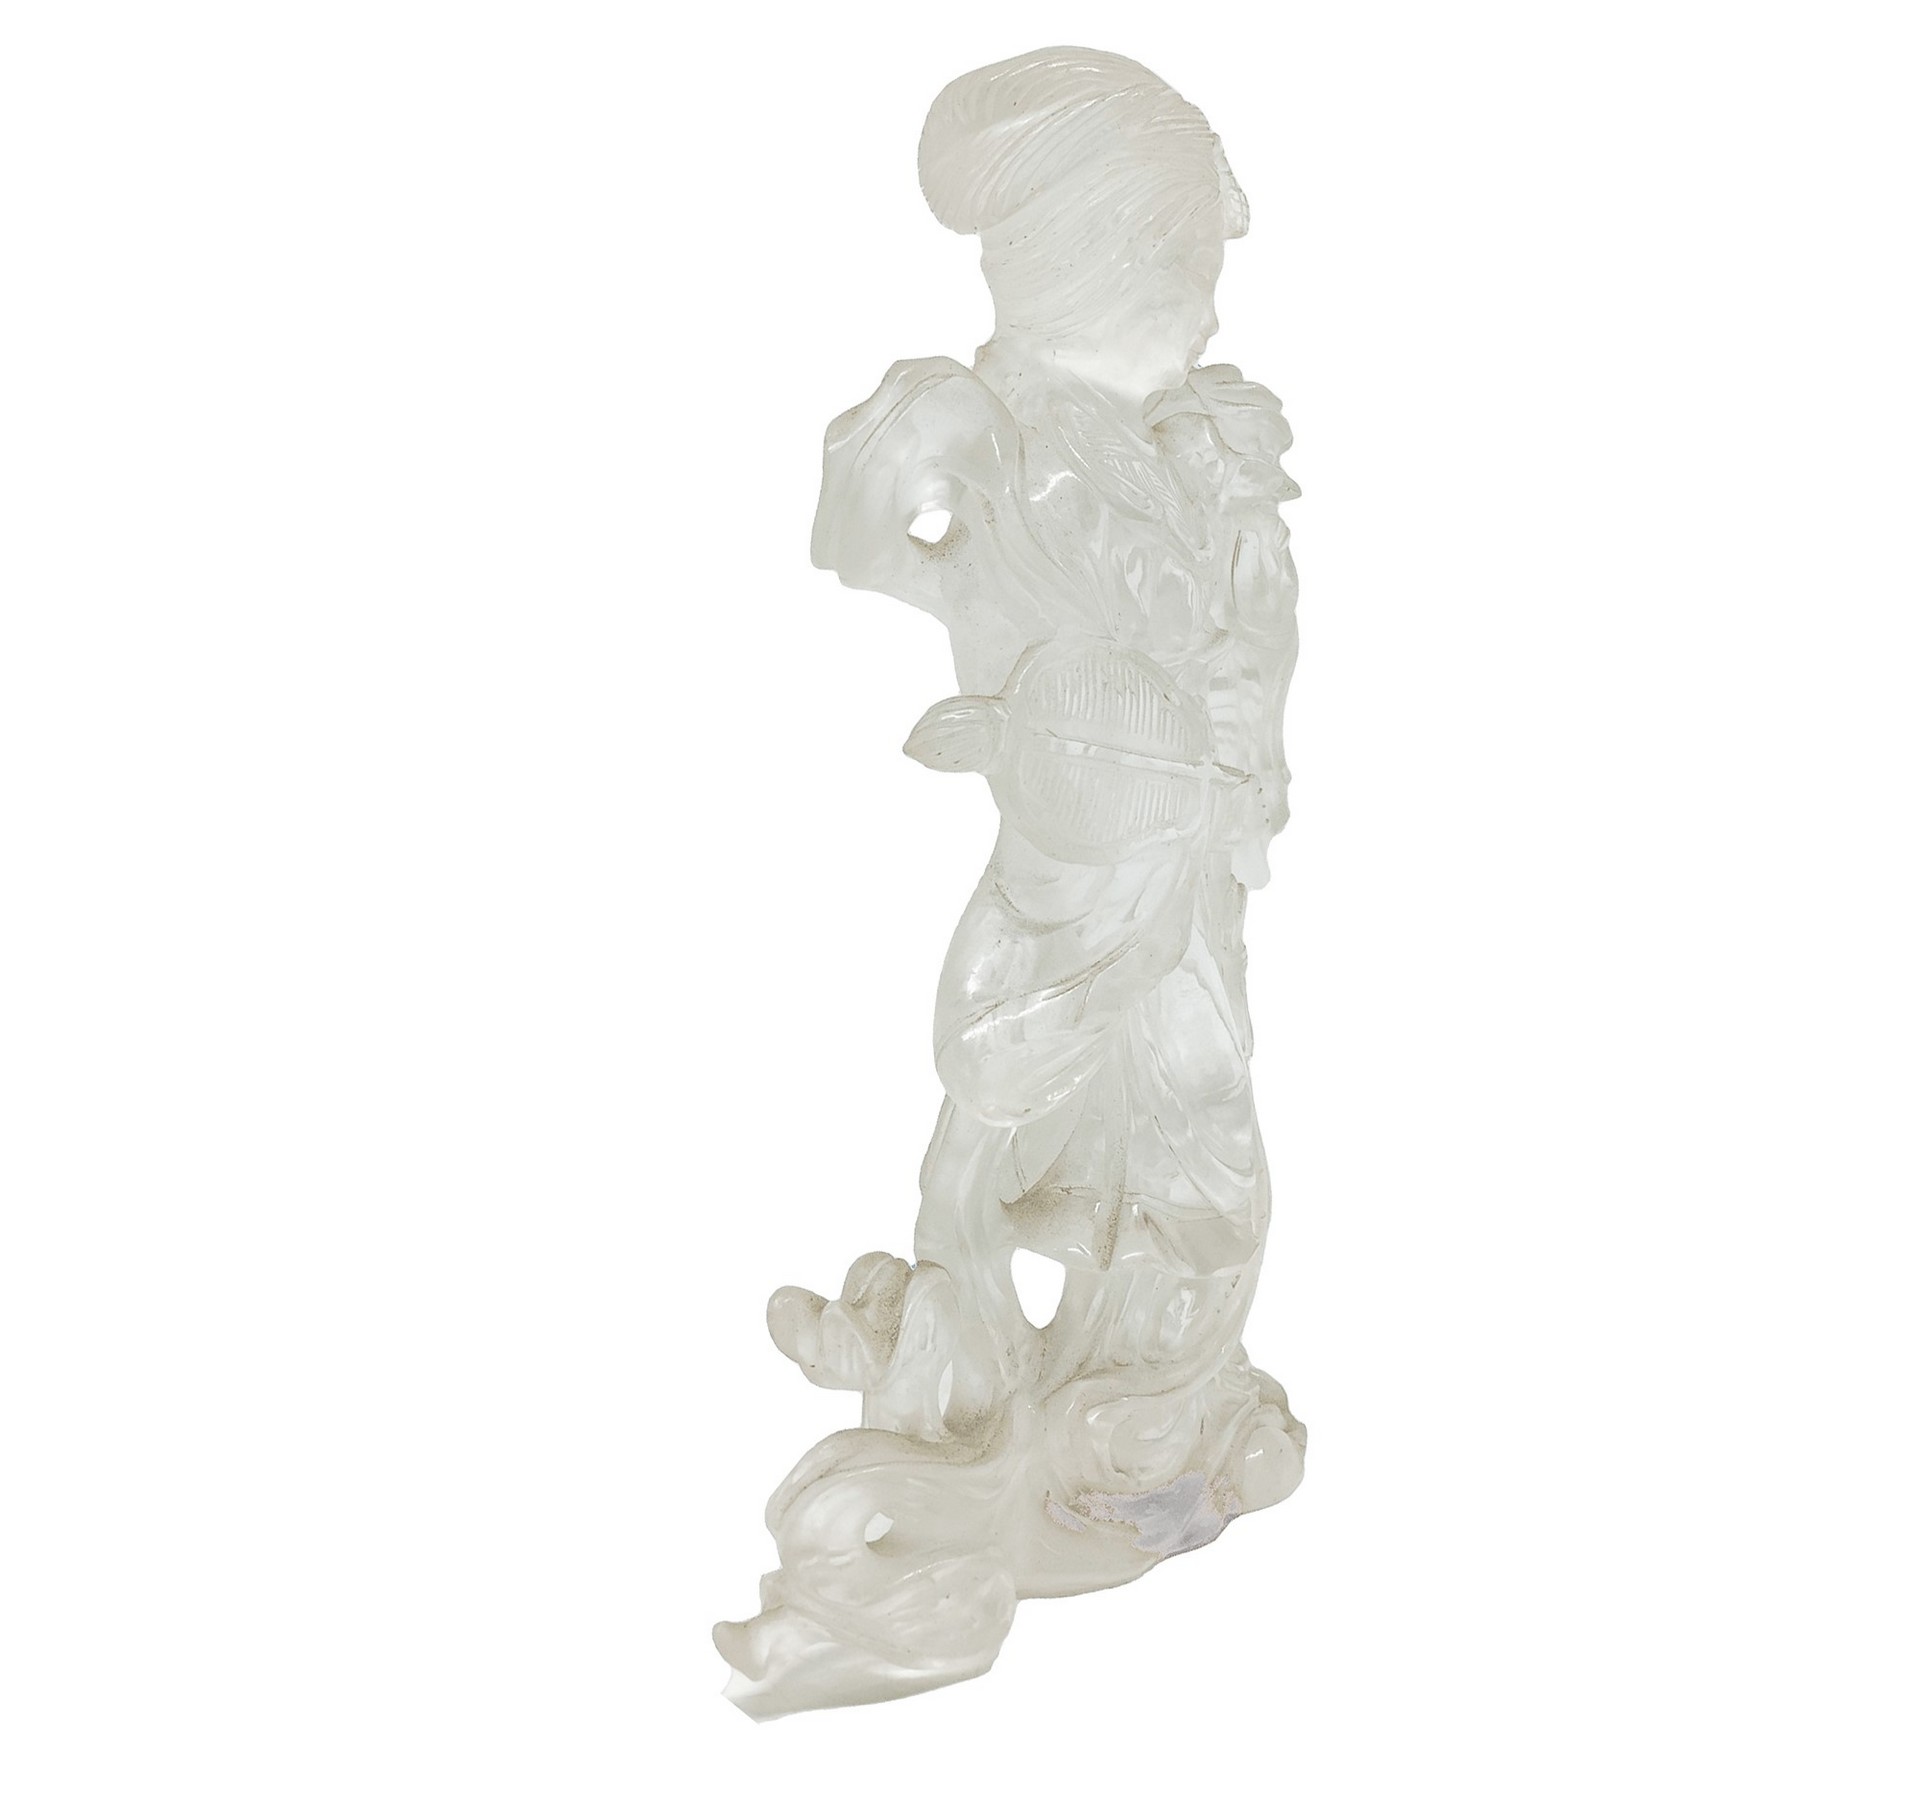 Transparent hard stone sculpture depicting Guanyin., 20th century - Image 4 of 4